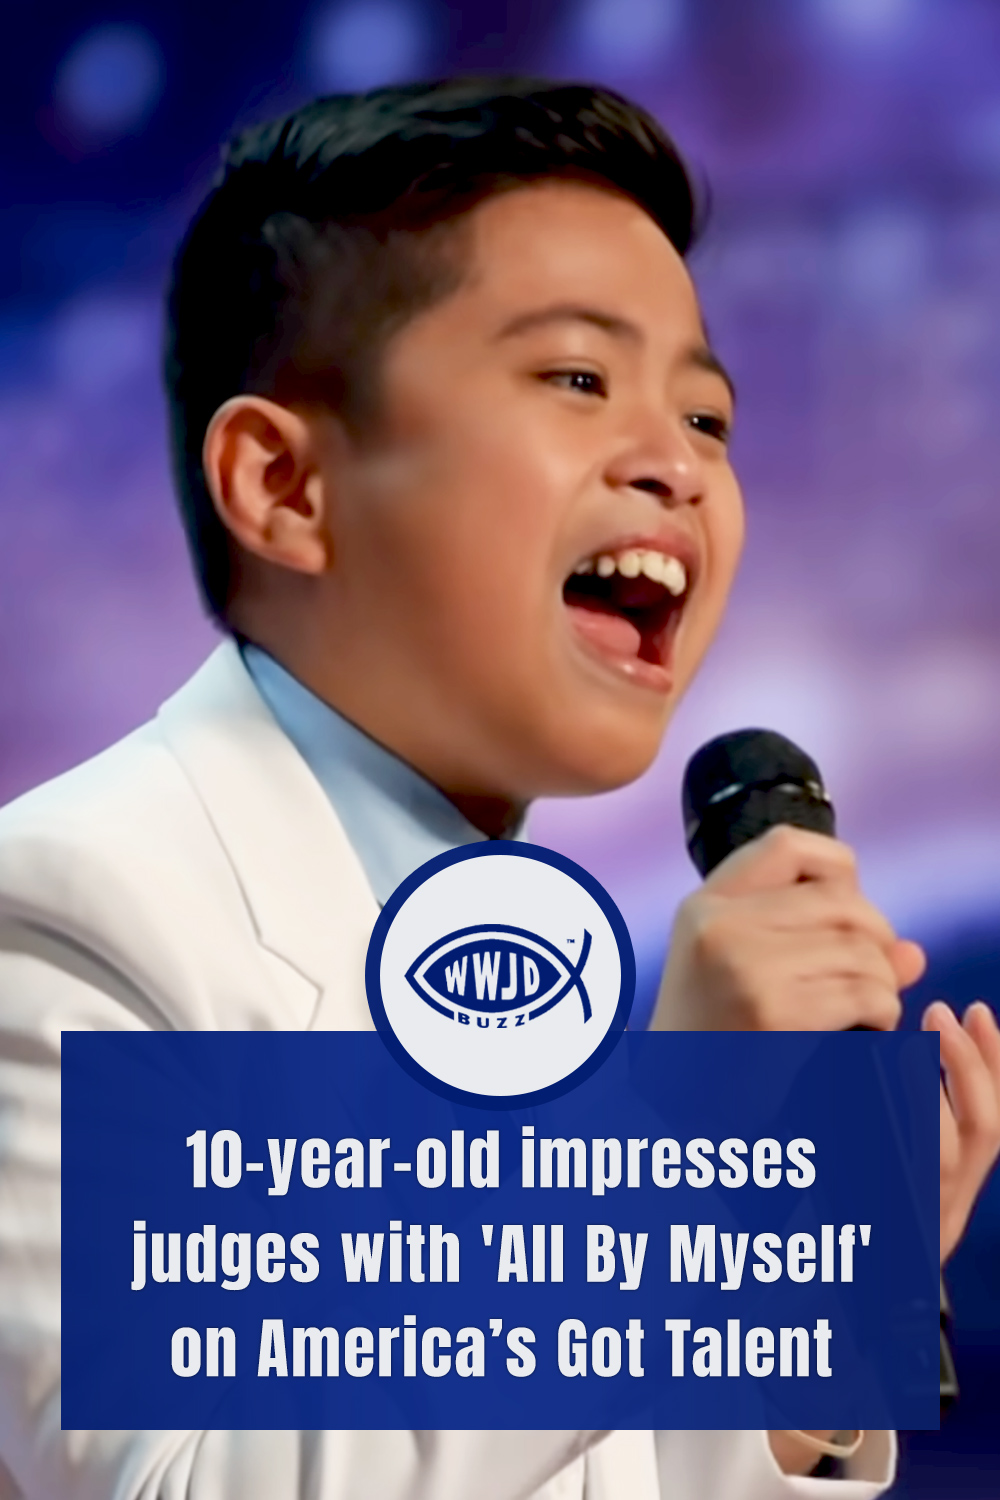 10-year-old impresses judges with \'All By Myself\' on America’s Got Talent